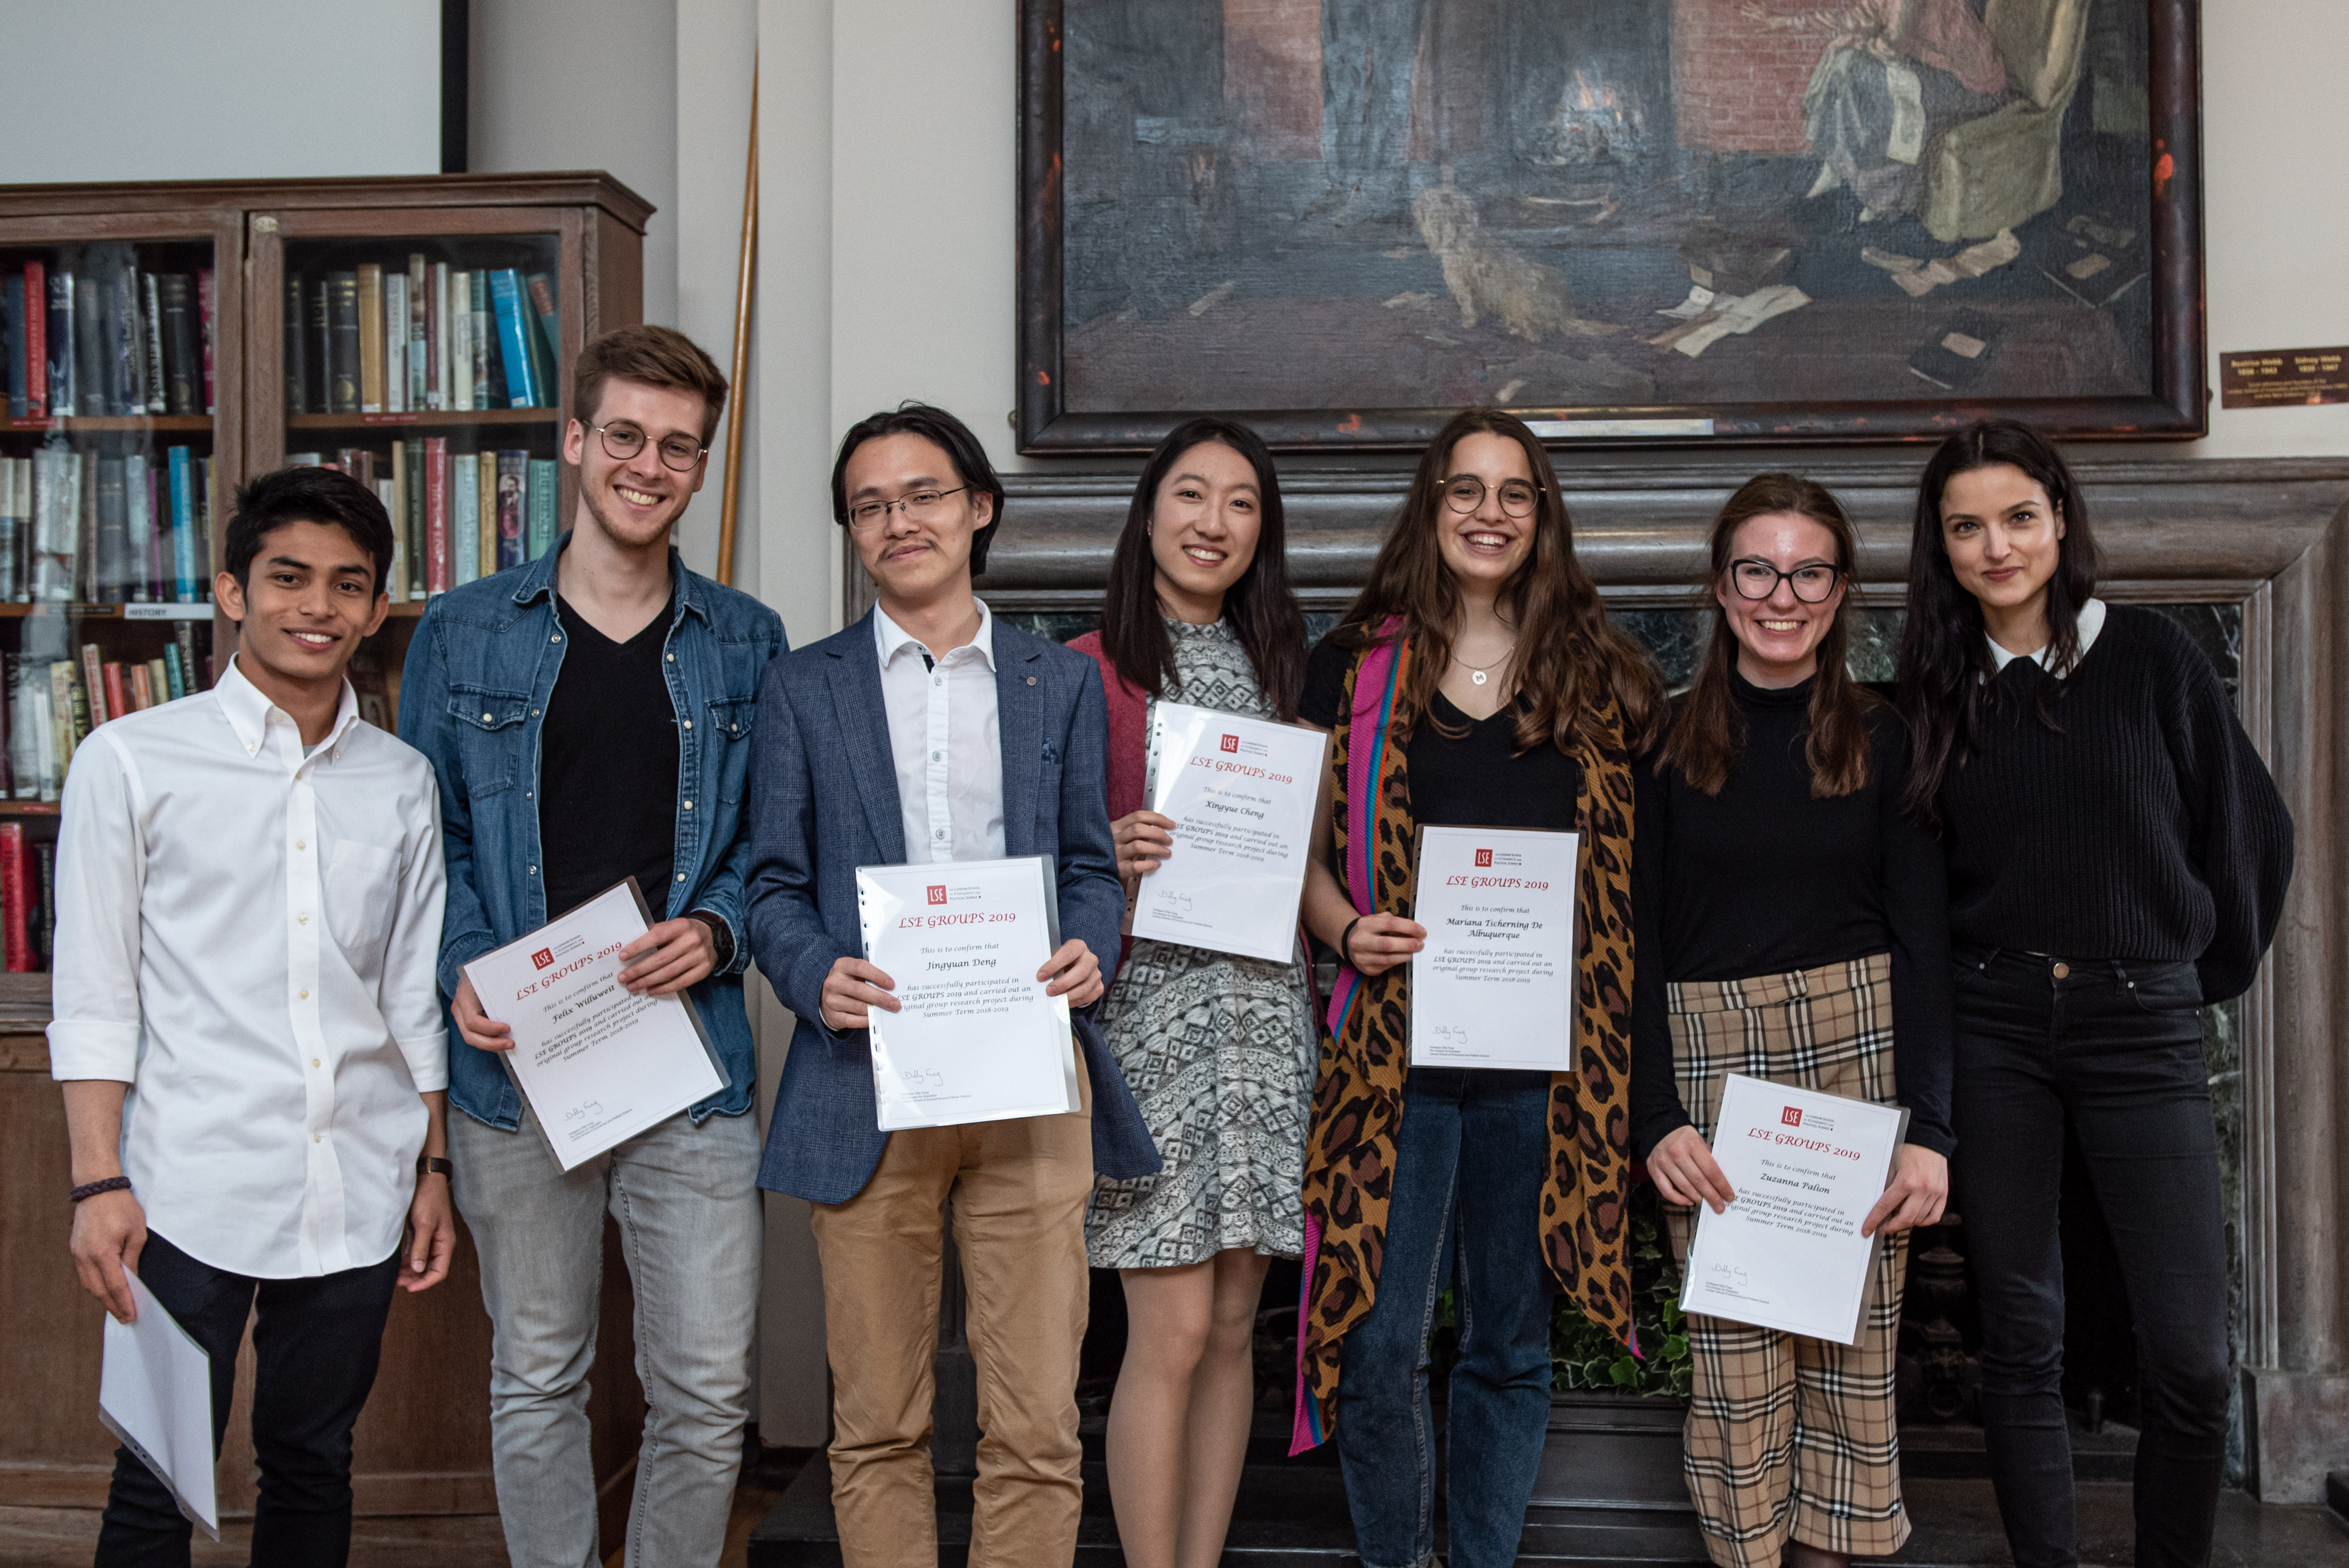 Angela and her research group receive their certificates